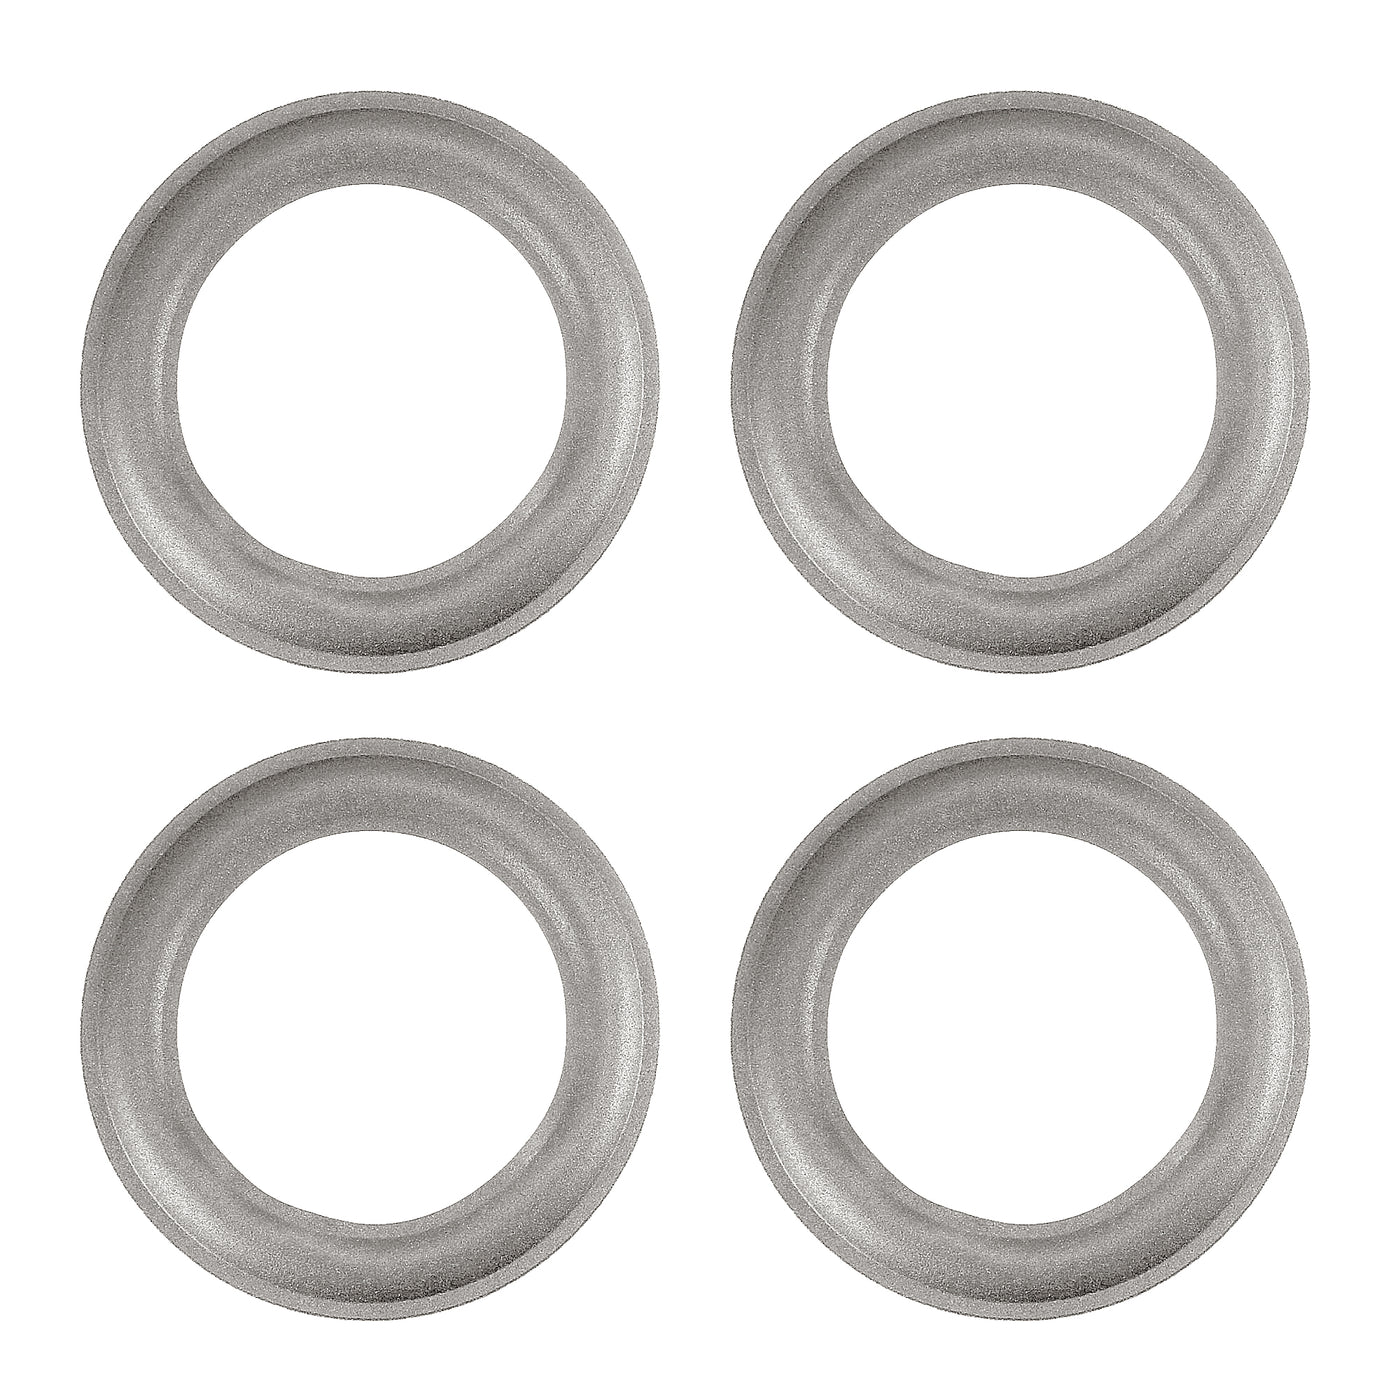 uxcell Uxcell 6.5" 6.5 inches Speaker Foam Edge Surround Rings Replacement Parts for Speaker Repair or DIY 4pcs